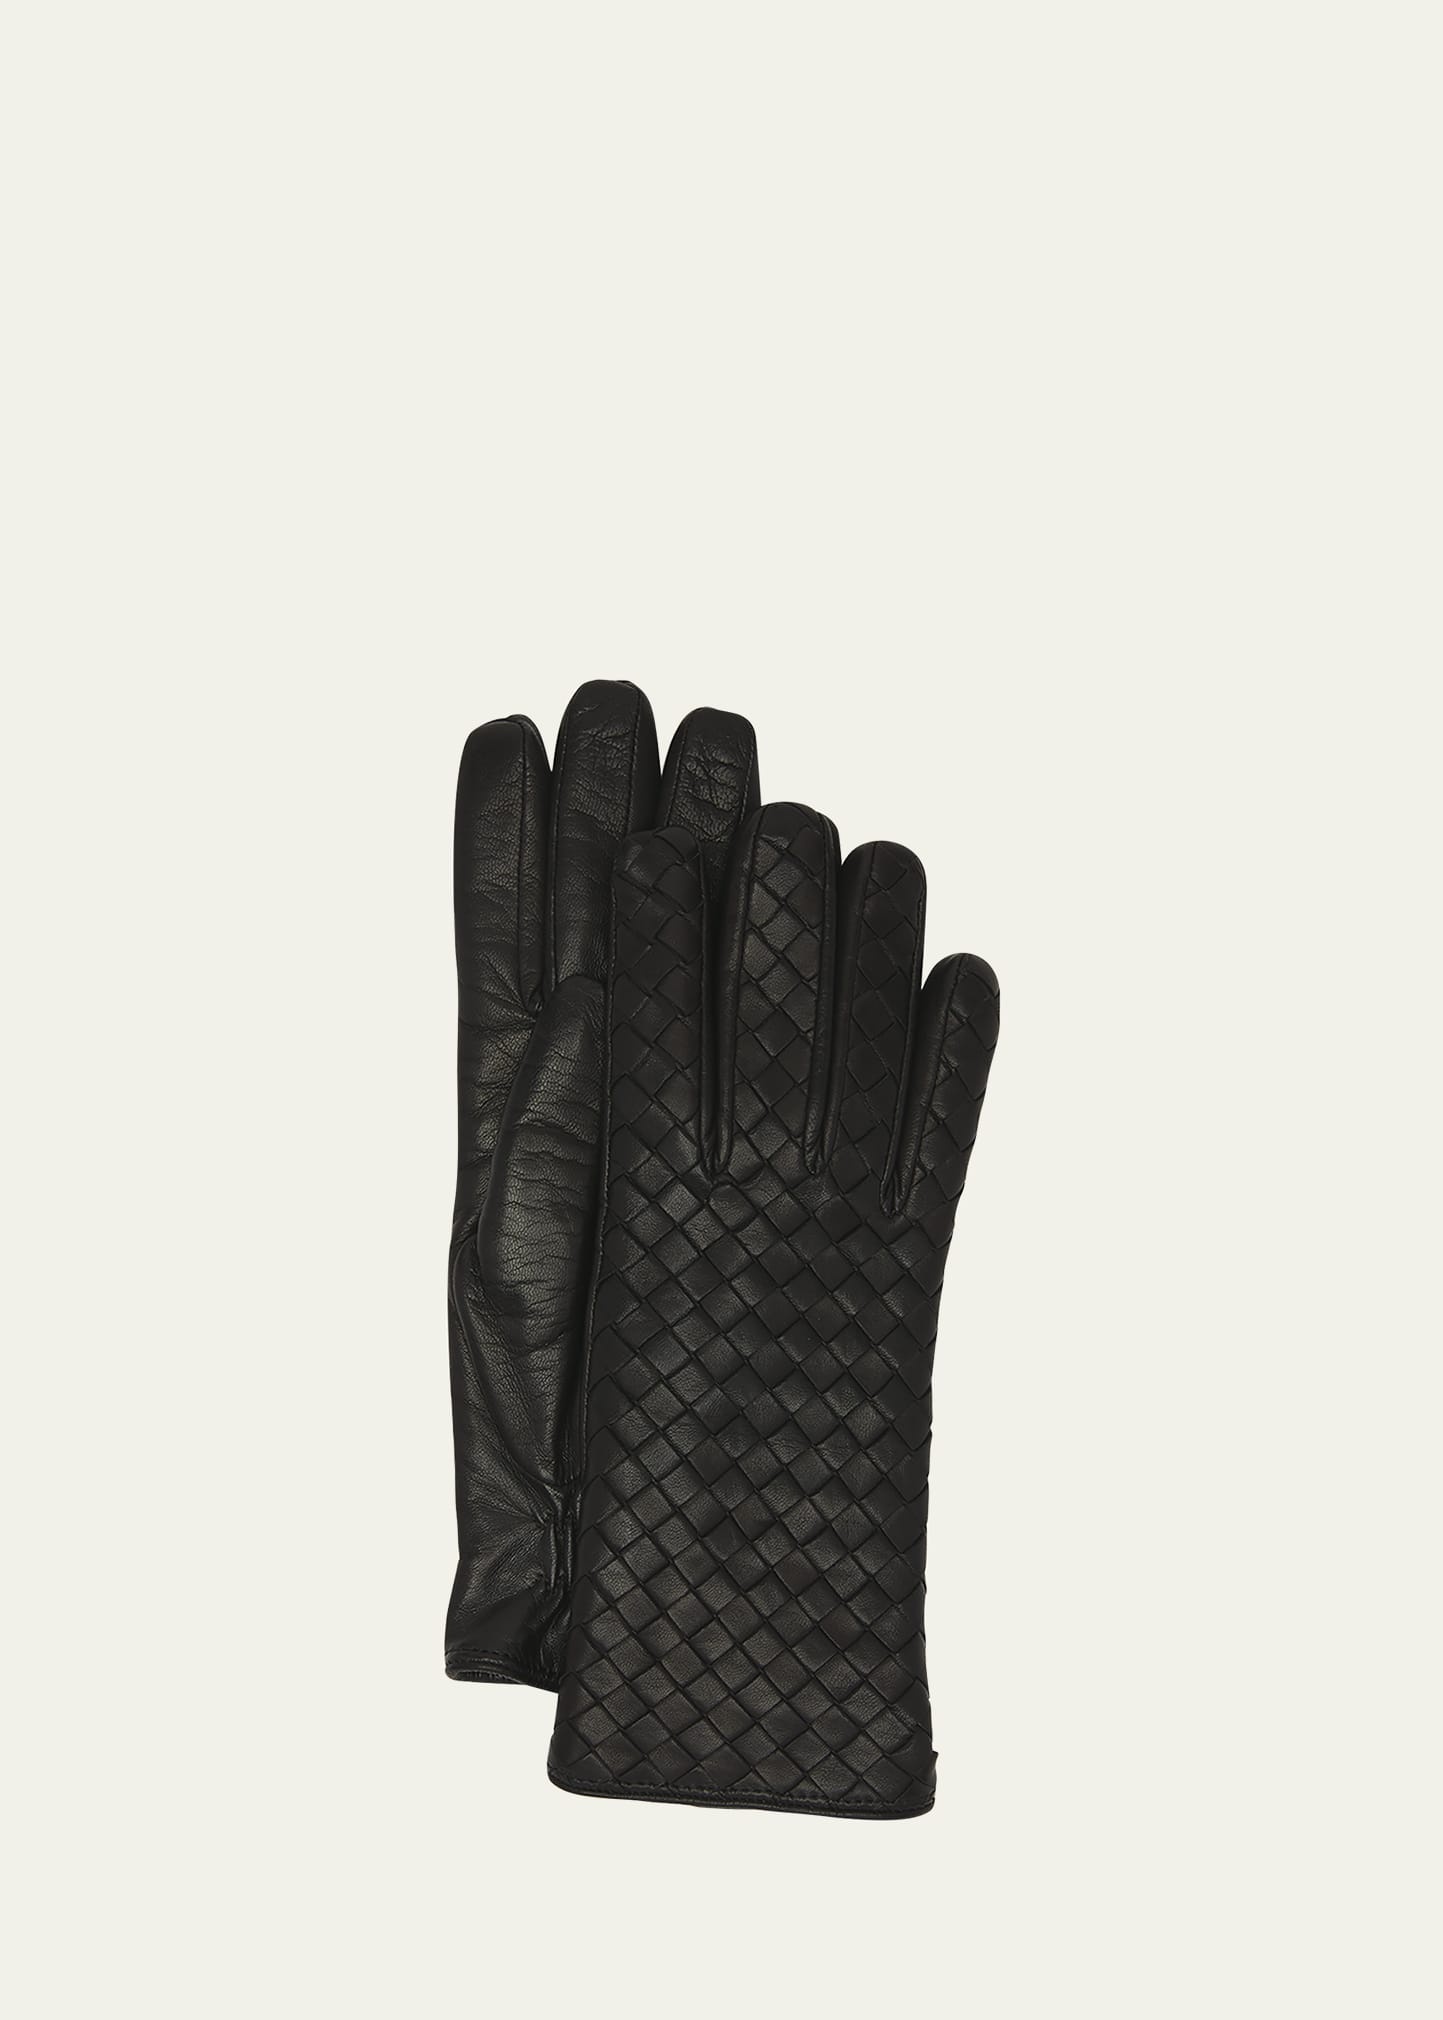 Woven Nappa Leather Gloves - 1